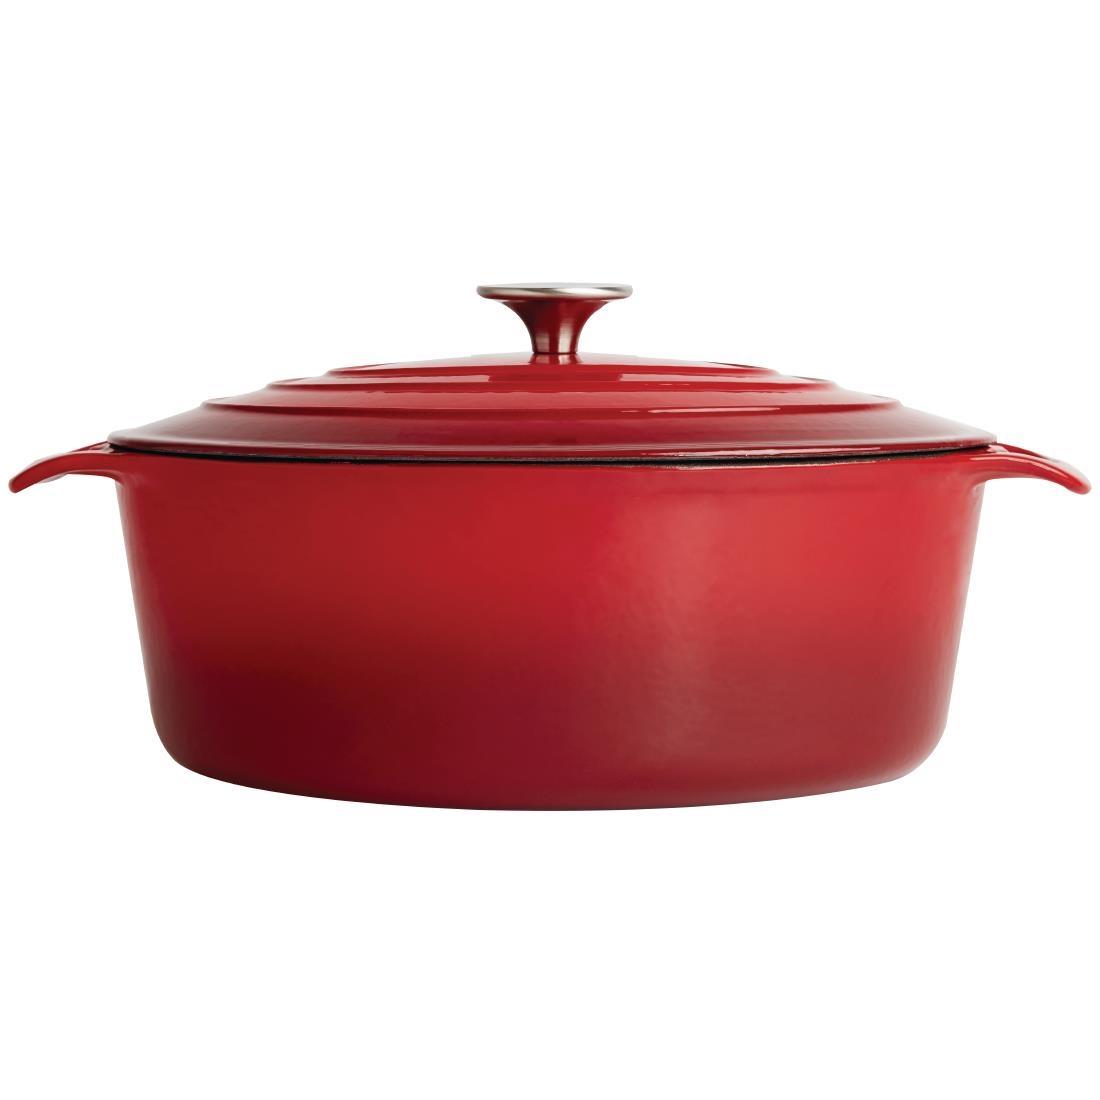 Vogue Red Oval Casserole Dish 5Ltr - GH313  - 3